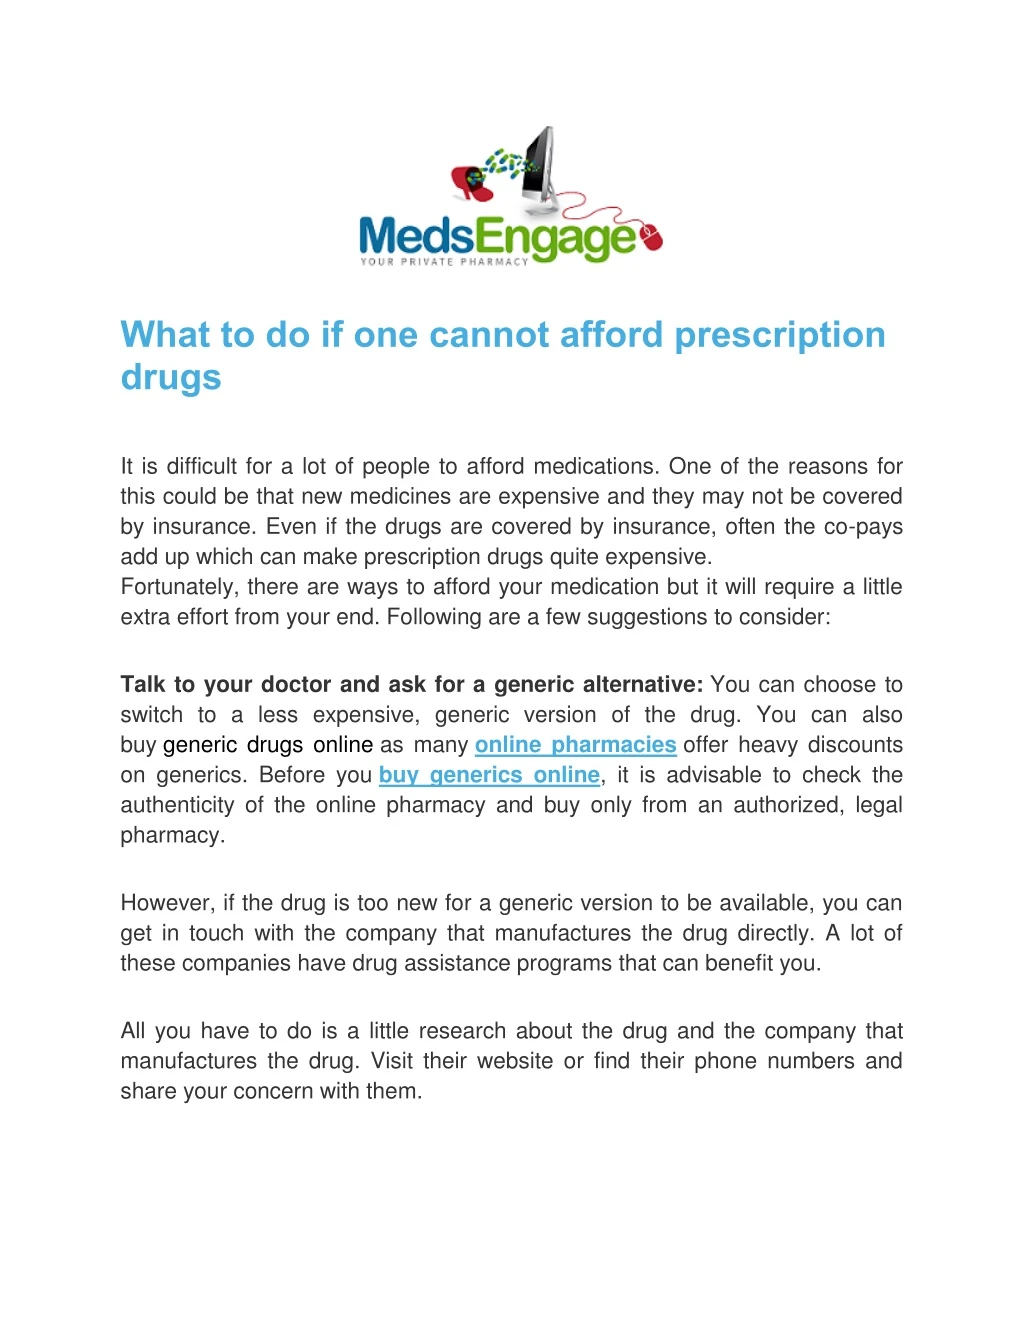 what to do if one cannot afford prescription drugs